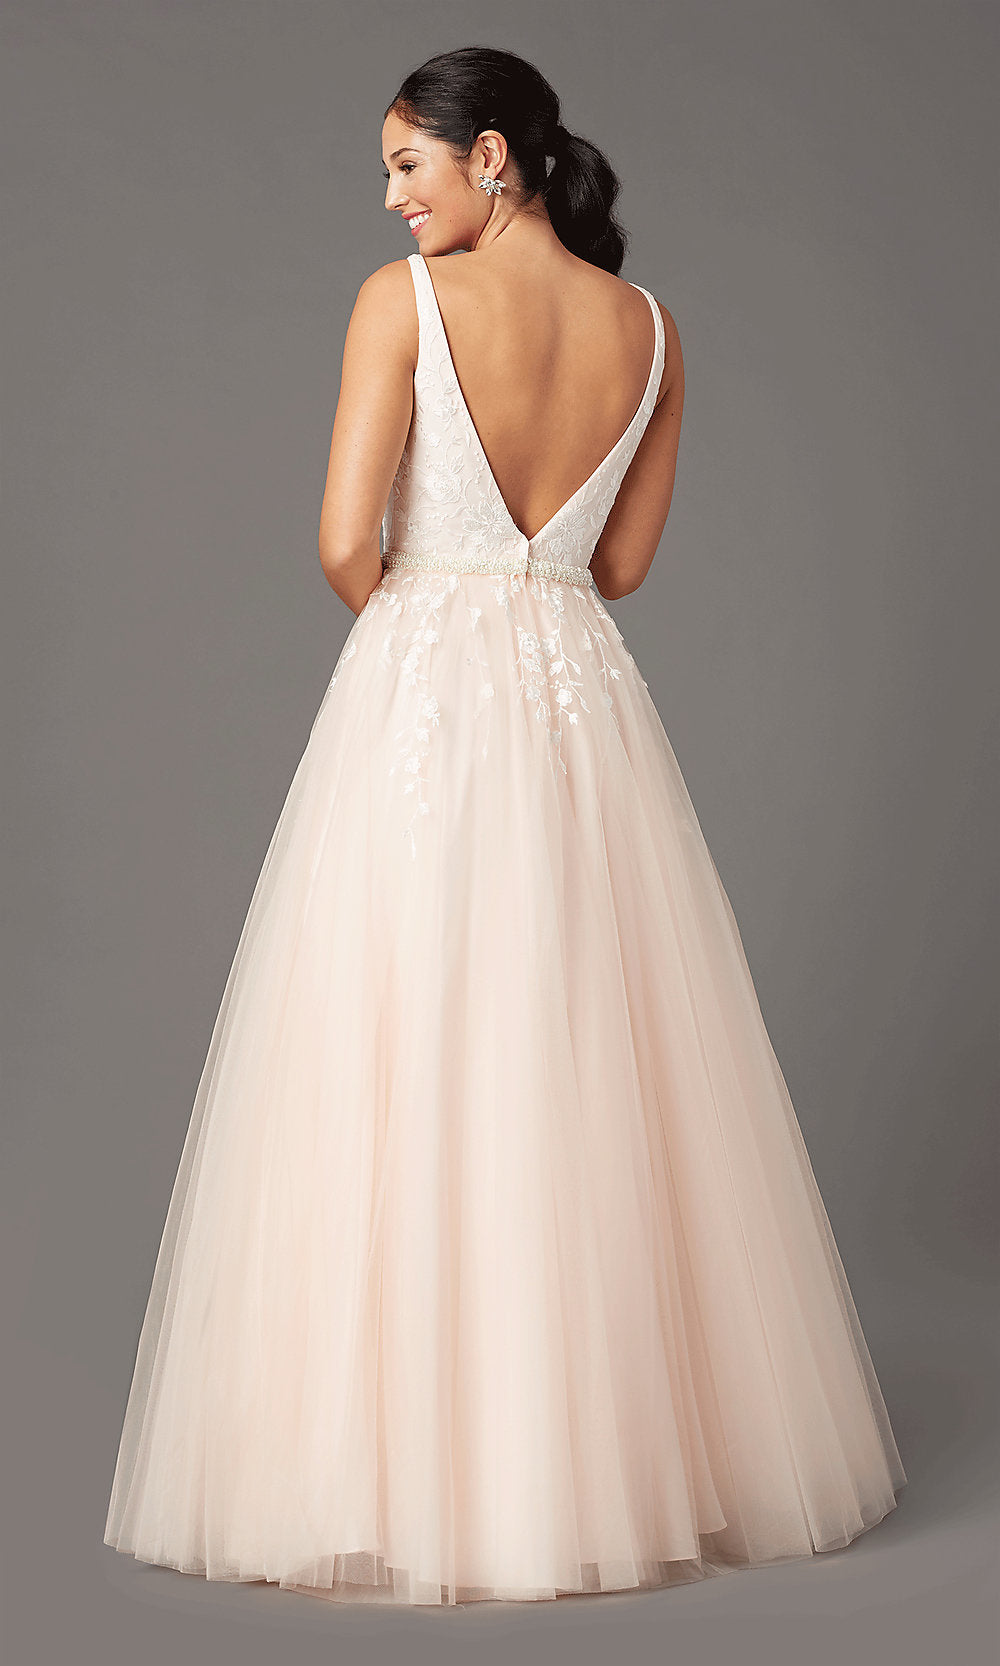  Long V-Neck Ball-Gown-Style Prom Dress by PromGirl